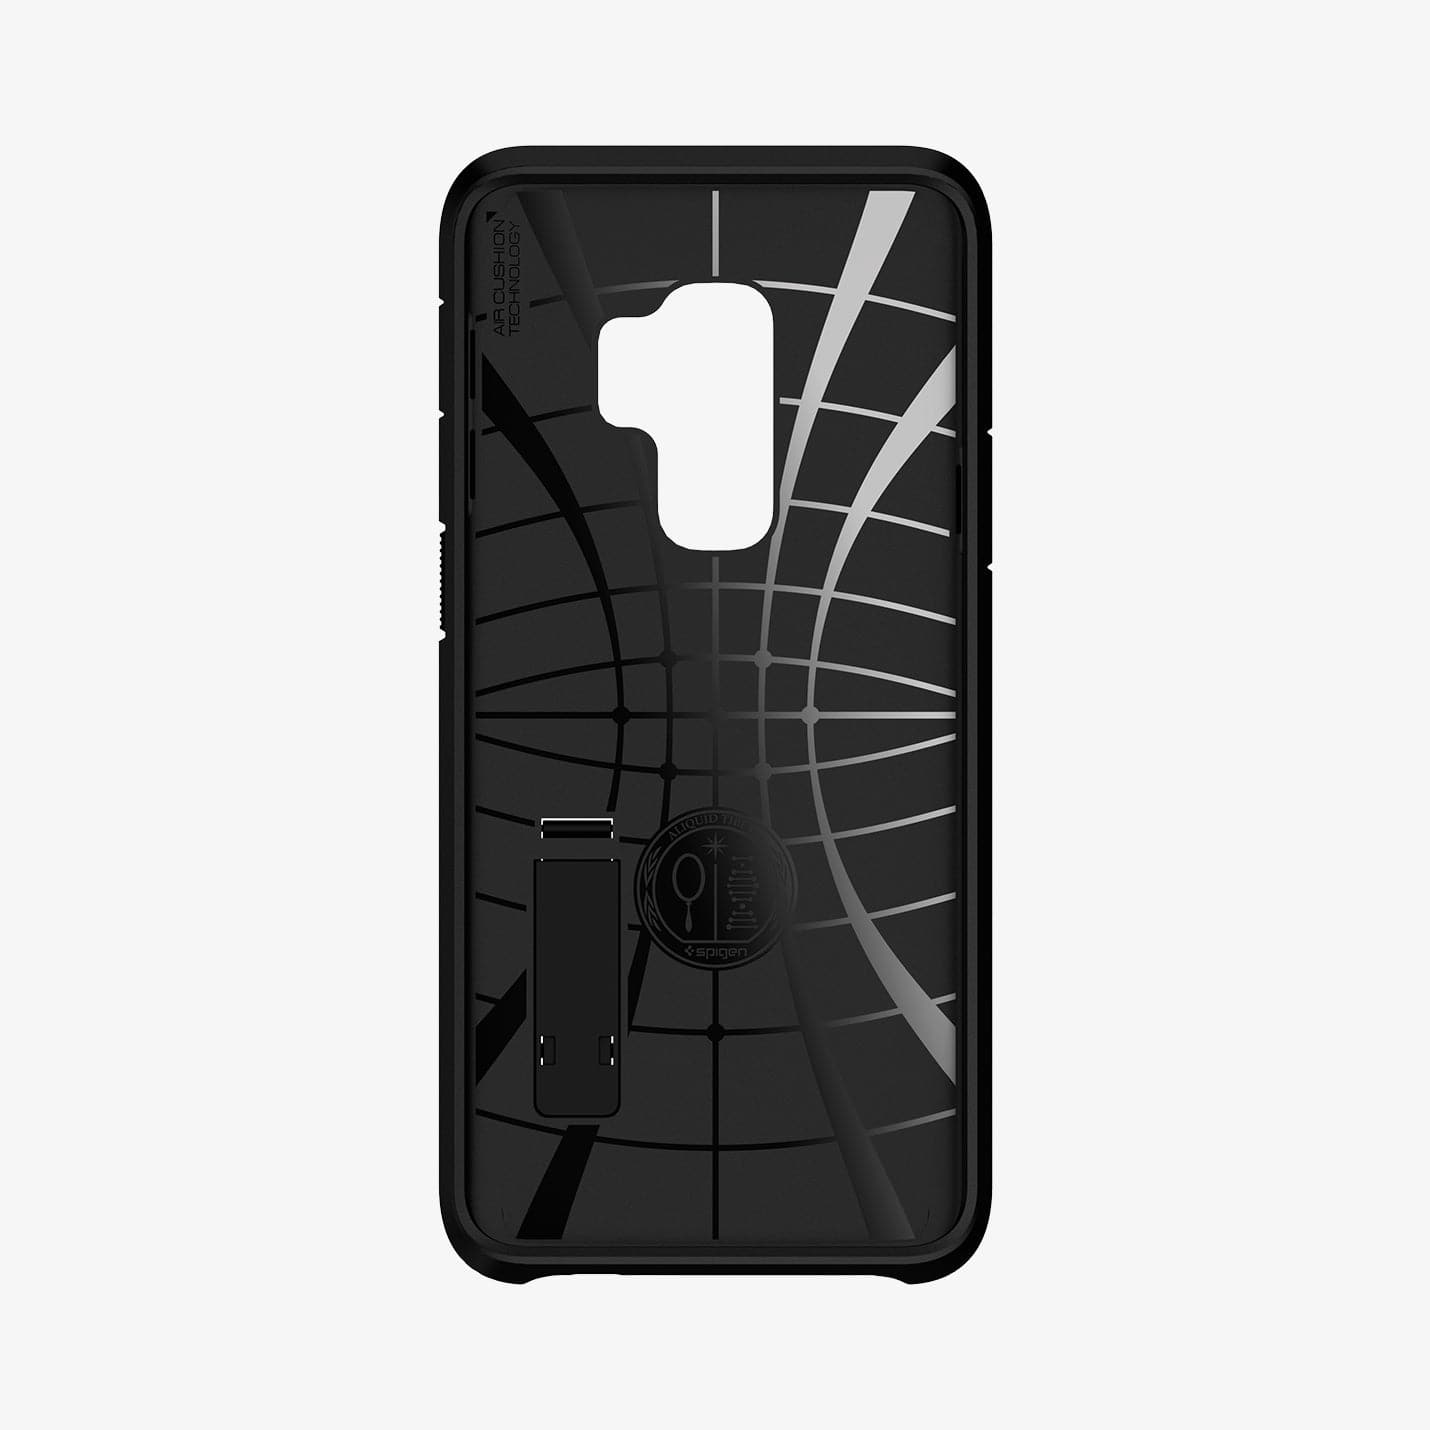 593CS22933 - Galaxy S9 Plus Tough Armor Case in black showing the inner case with spider web pattern